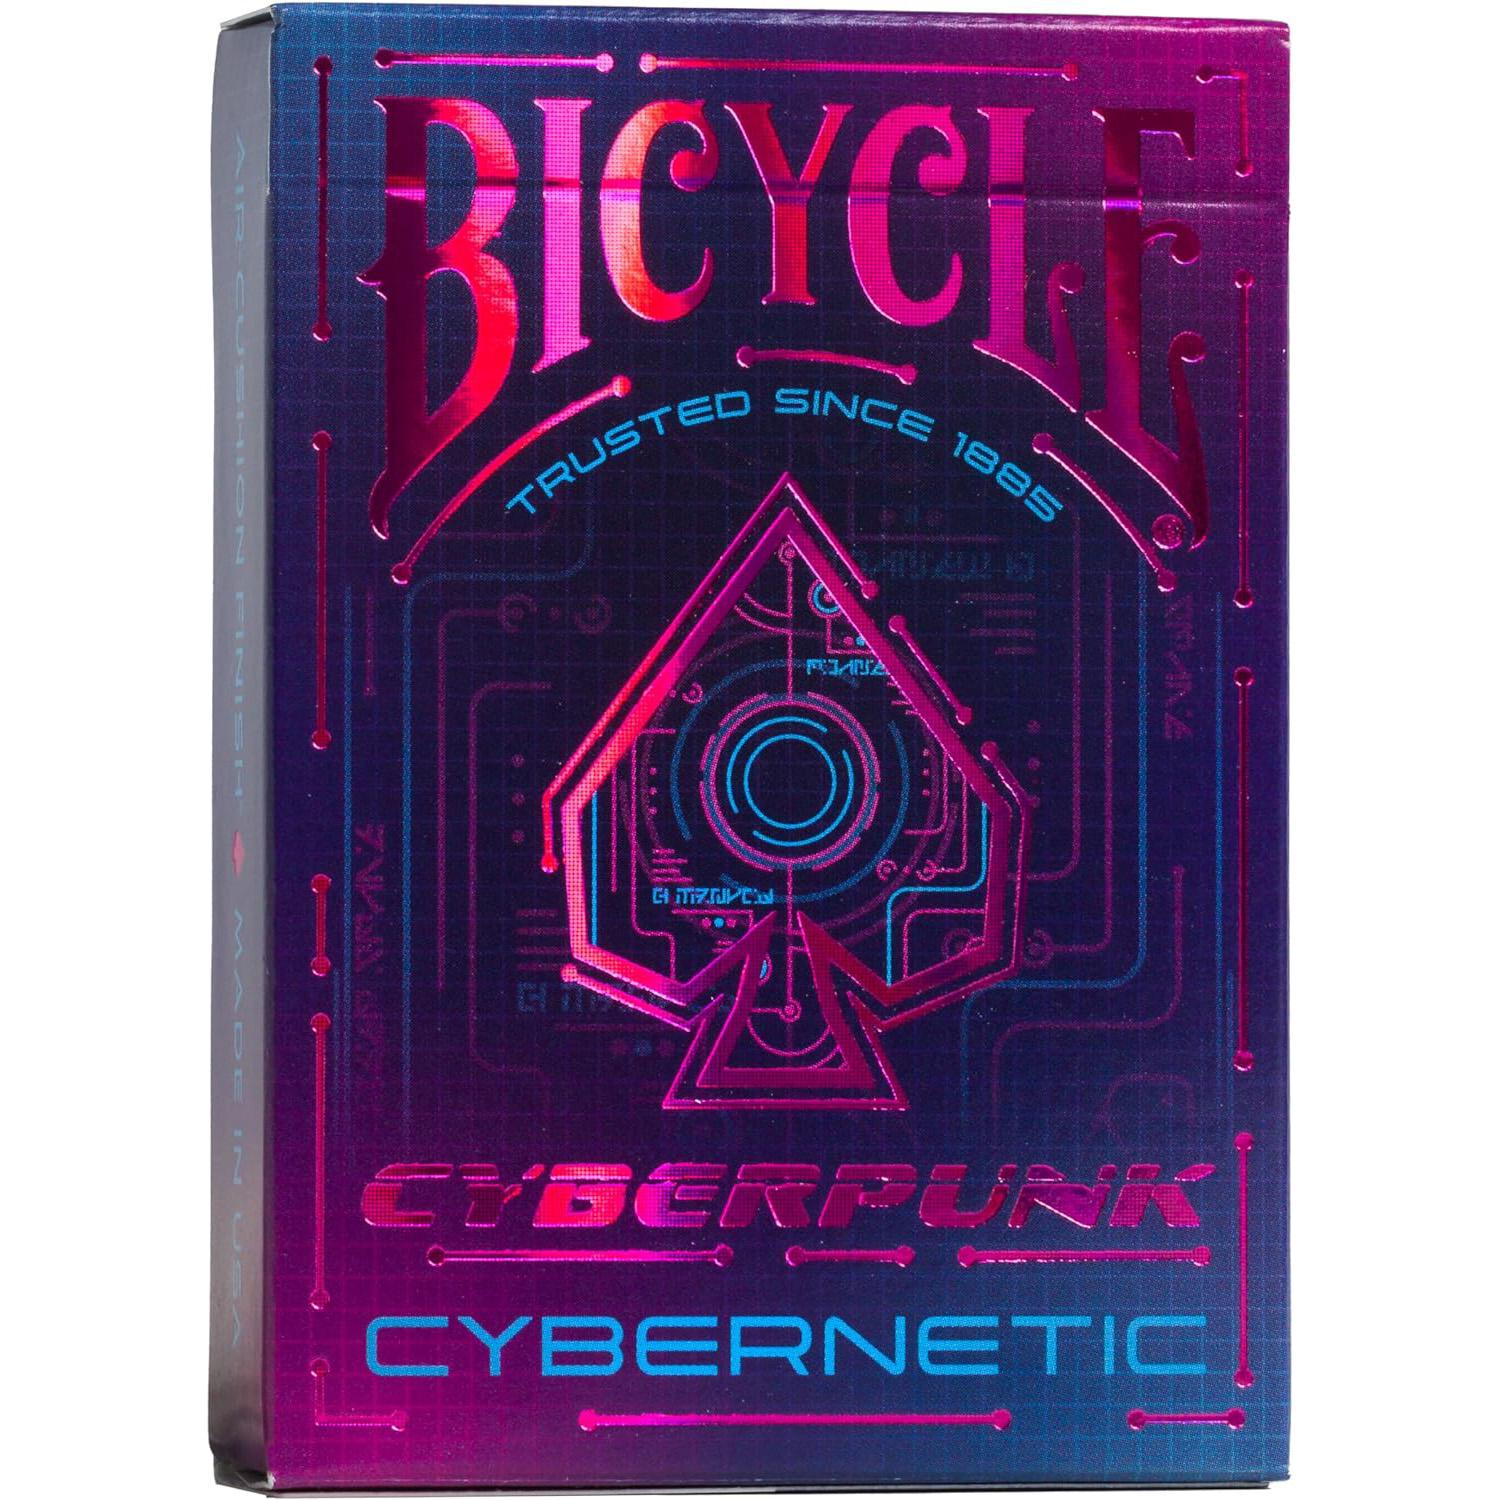 Bicycle Cyberpunk Cybernetic Premium Playing Cards for $7.81